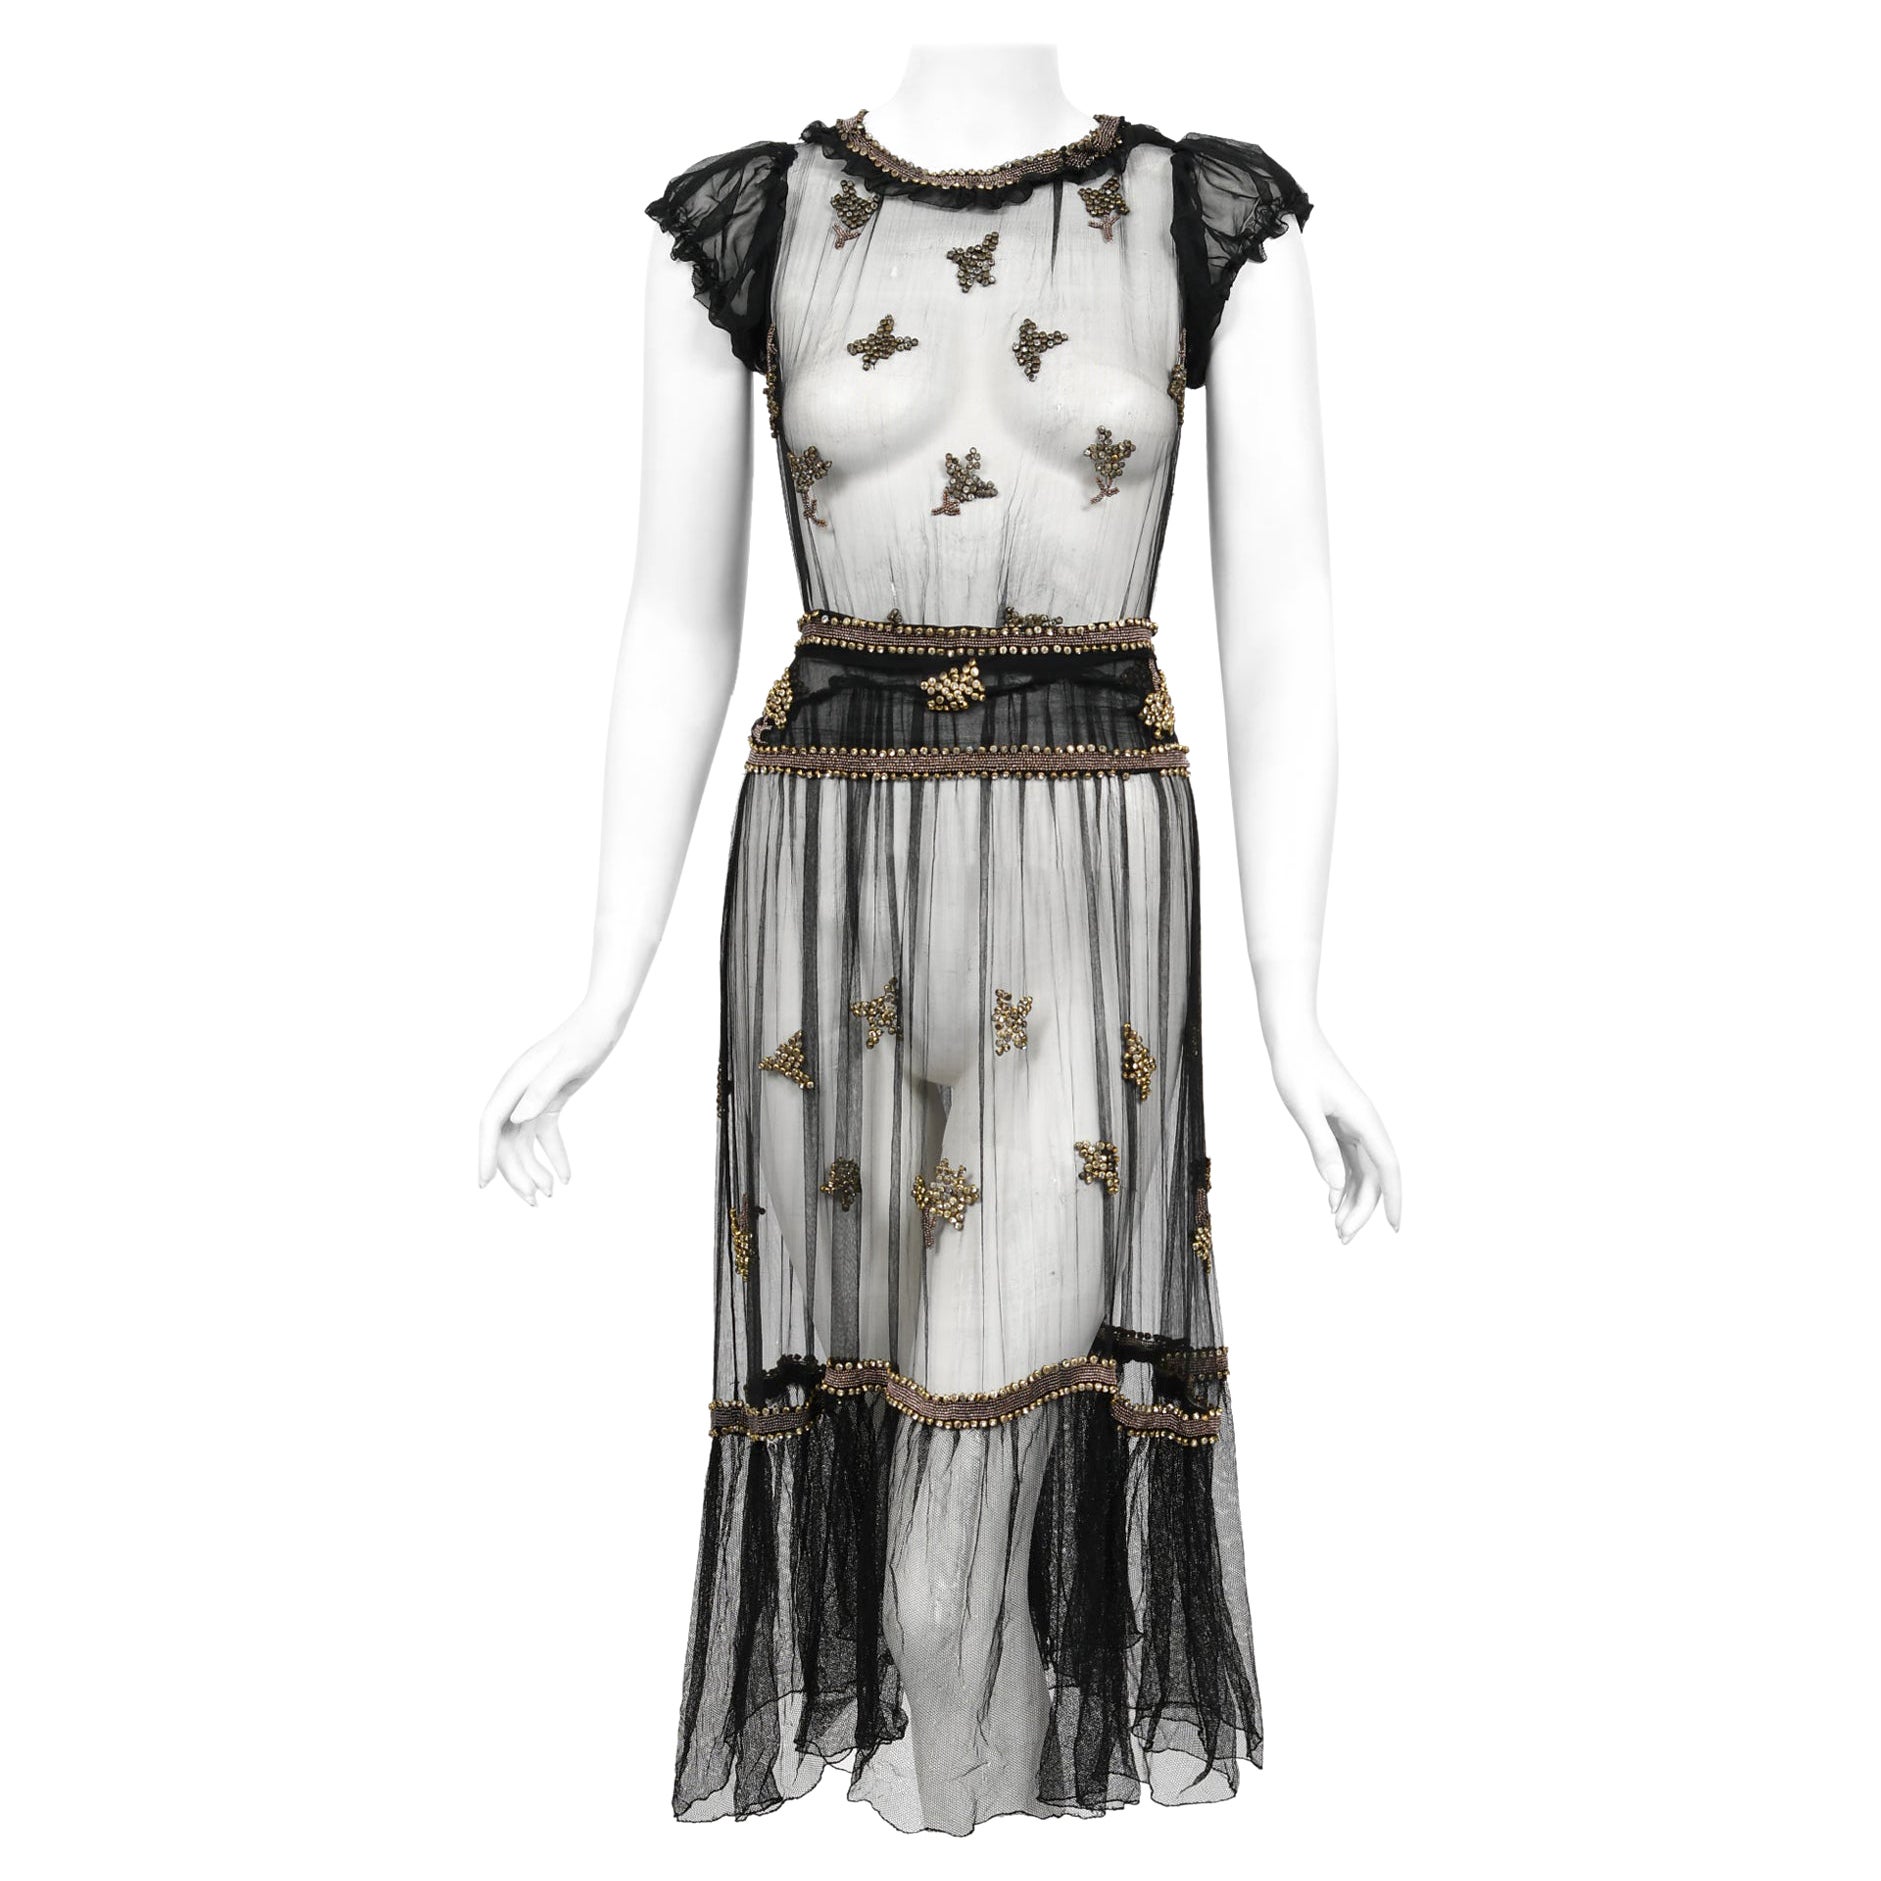 Vintage 1930's Bette Davis Owned Old Hollywood Sheer Beaded Silk Couture Dress For Sale